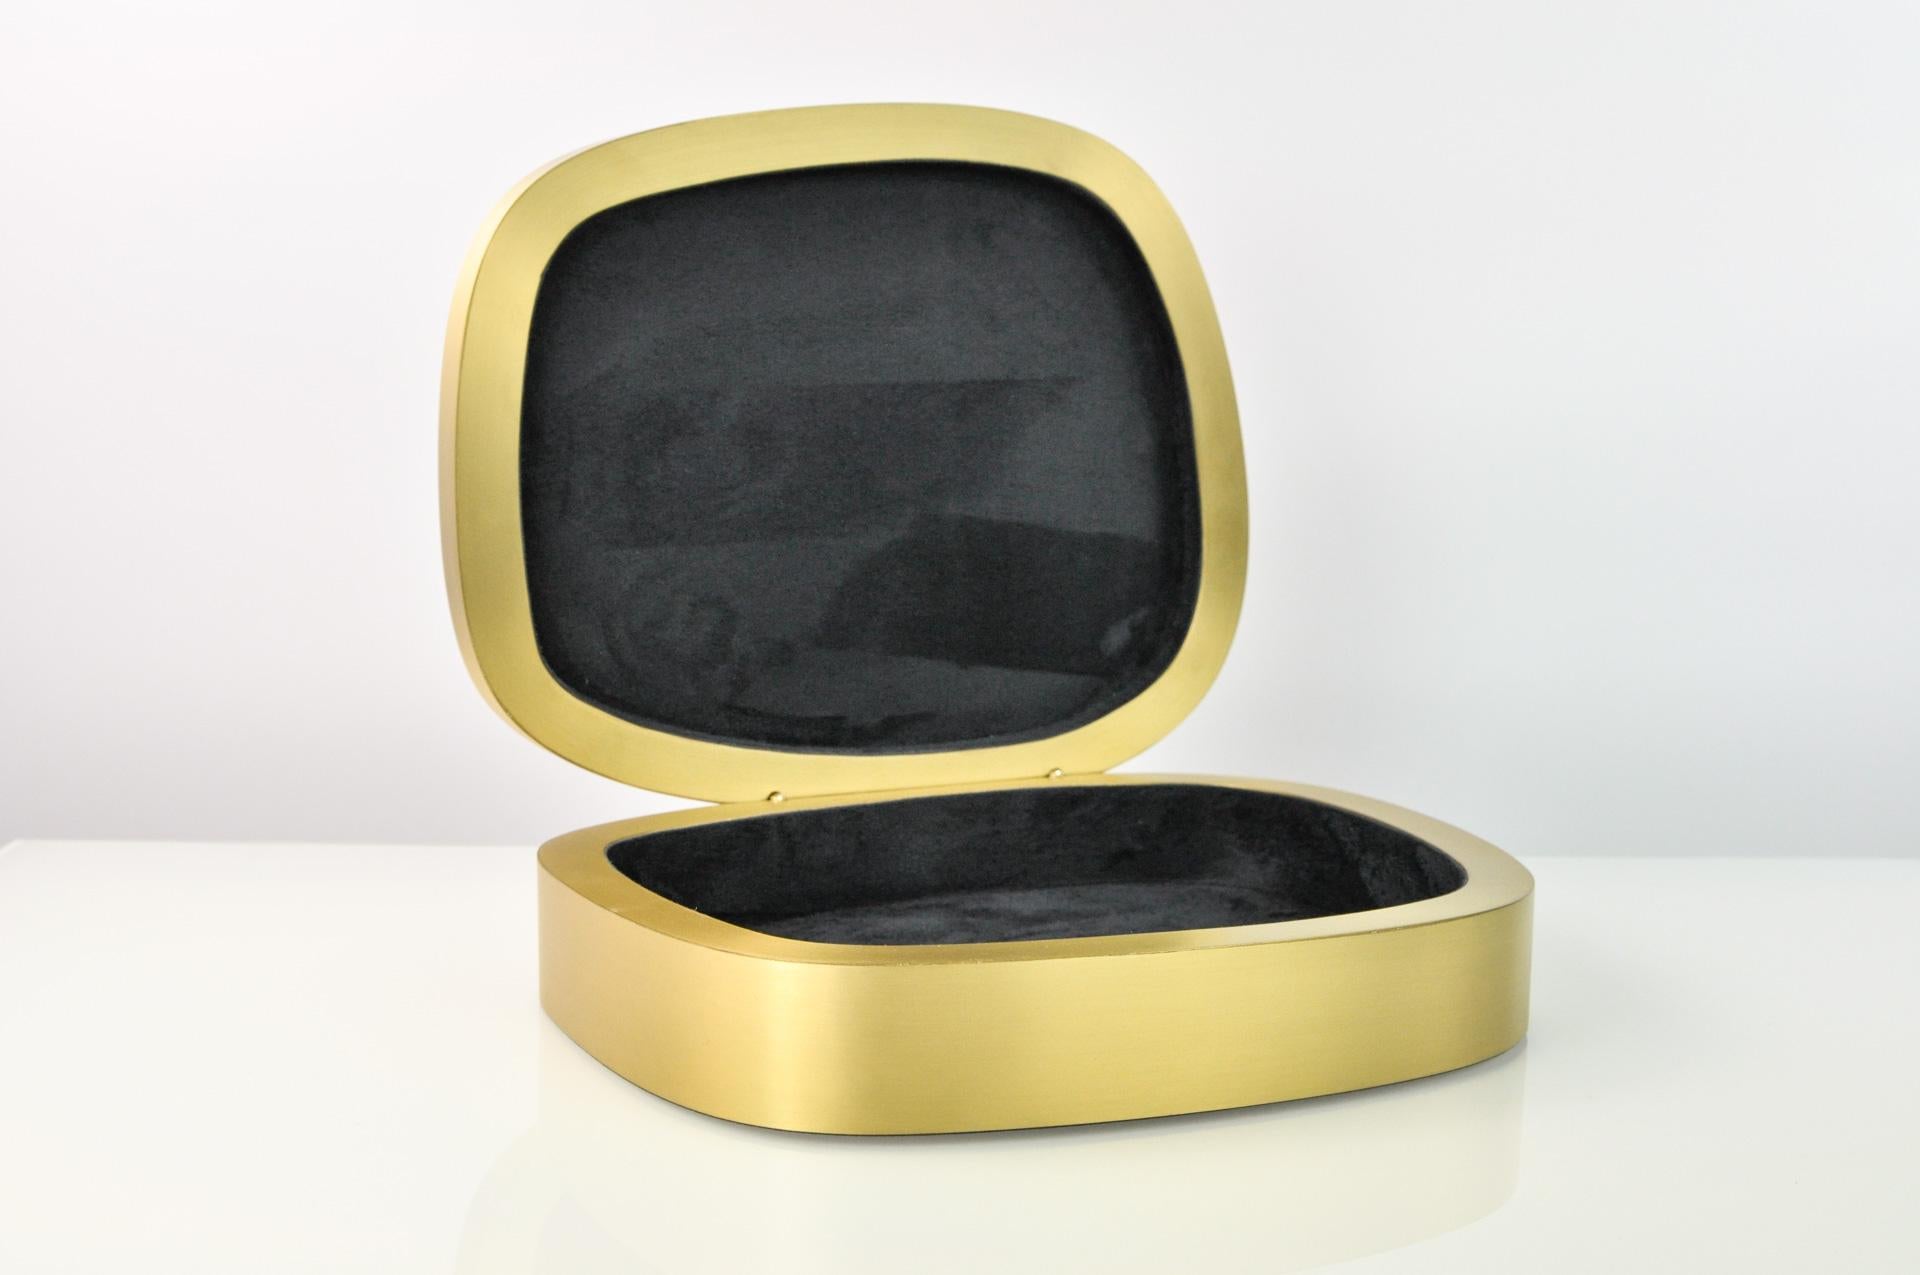 This box is handcrafted of brushed brass with a white rock crystal lid.

It is hinged and the interior is lined with a high quality black microsuede.

The dimensions of this piece are 10,8